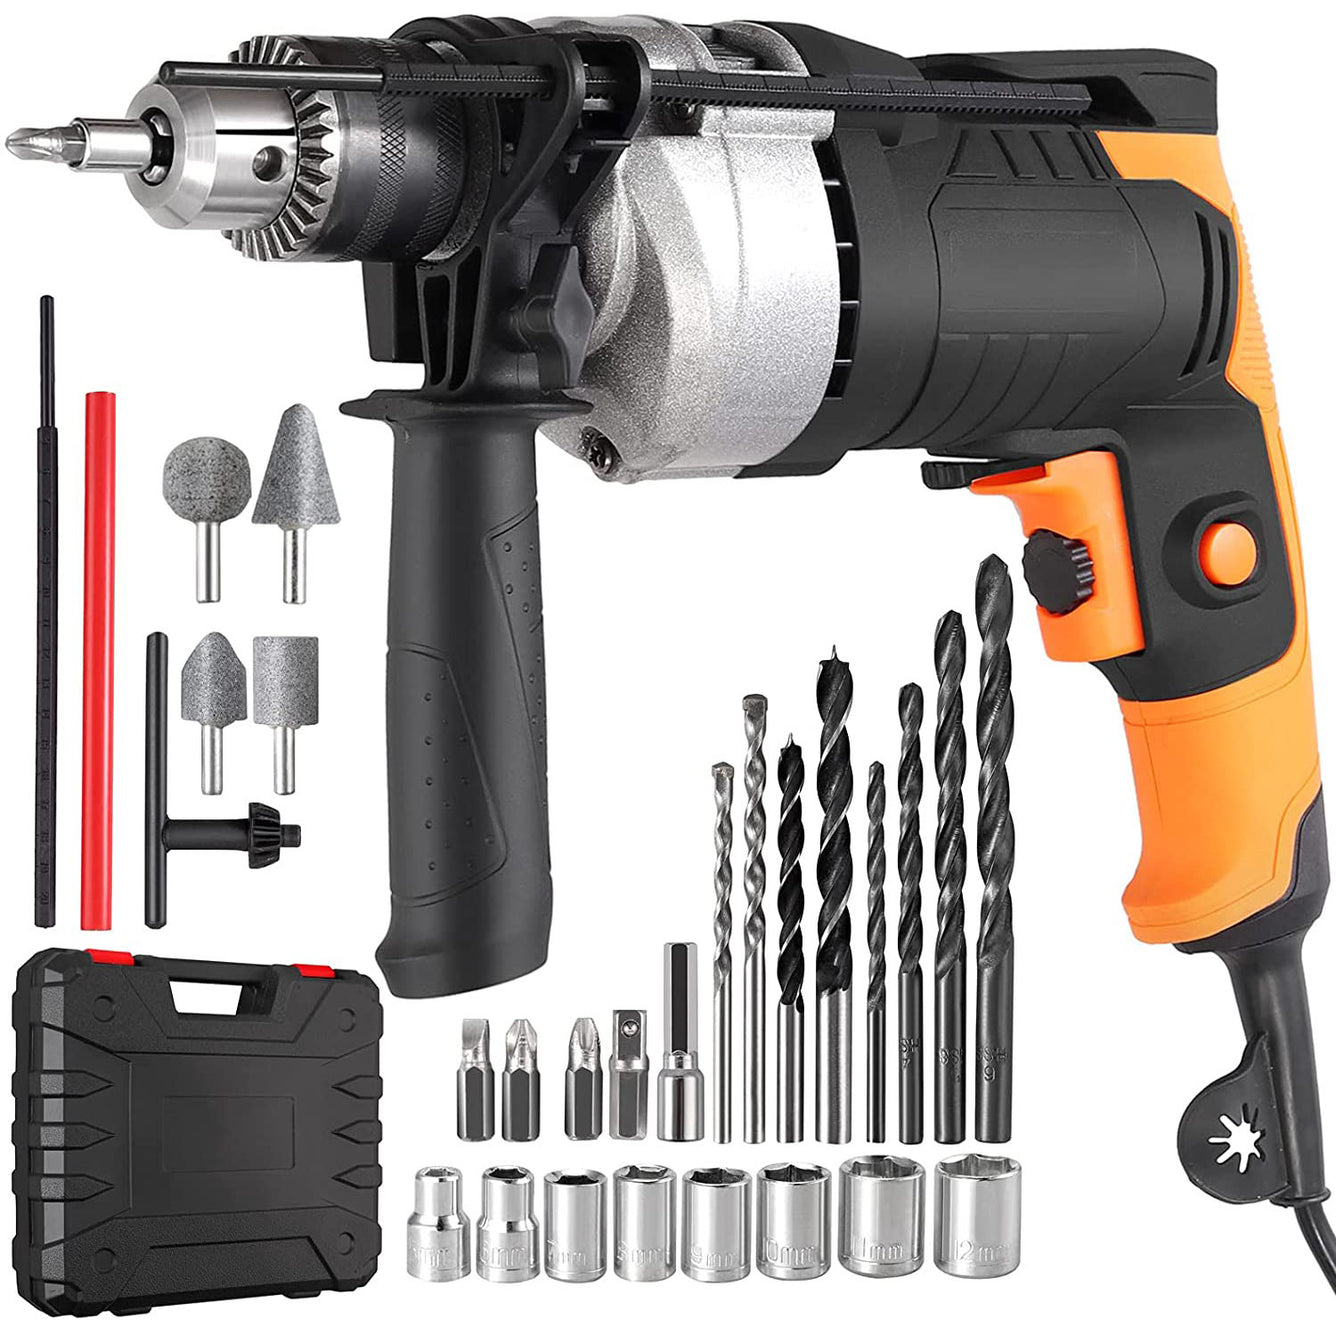 Proster 780W Corded Hammer Drill Kit